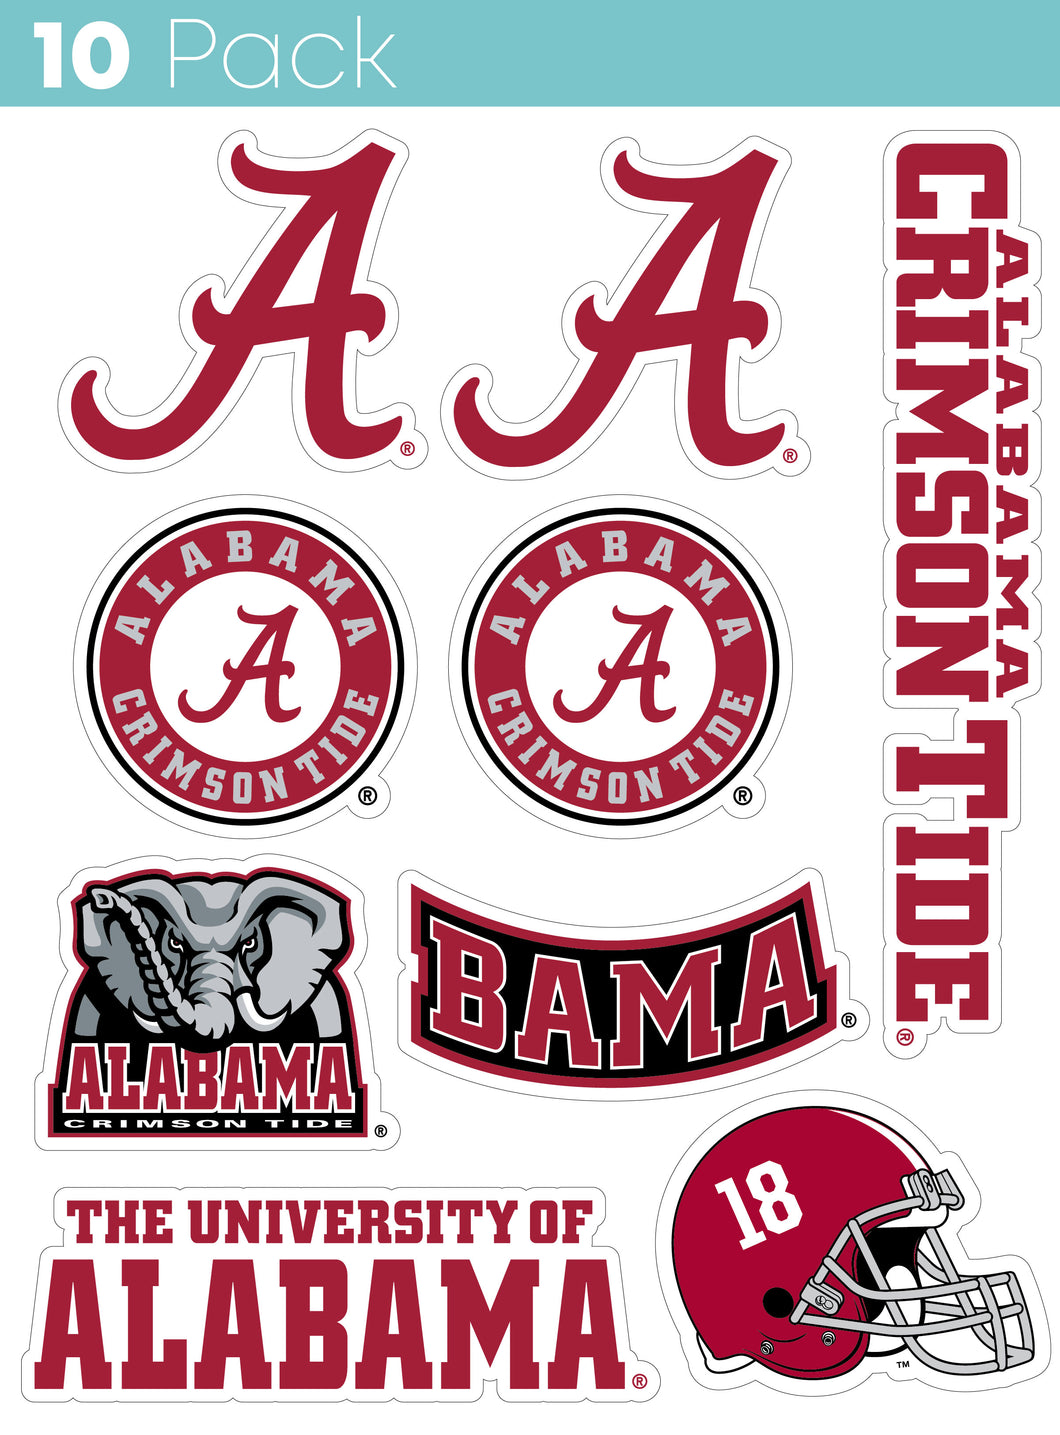 Alabama Crimson Tide 10-Pack, 4 inches in size on one of its sides NCAA Durable School Spirit Vinyl Decal Sticker